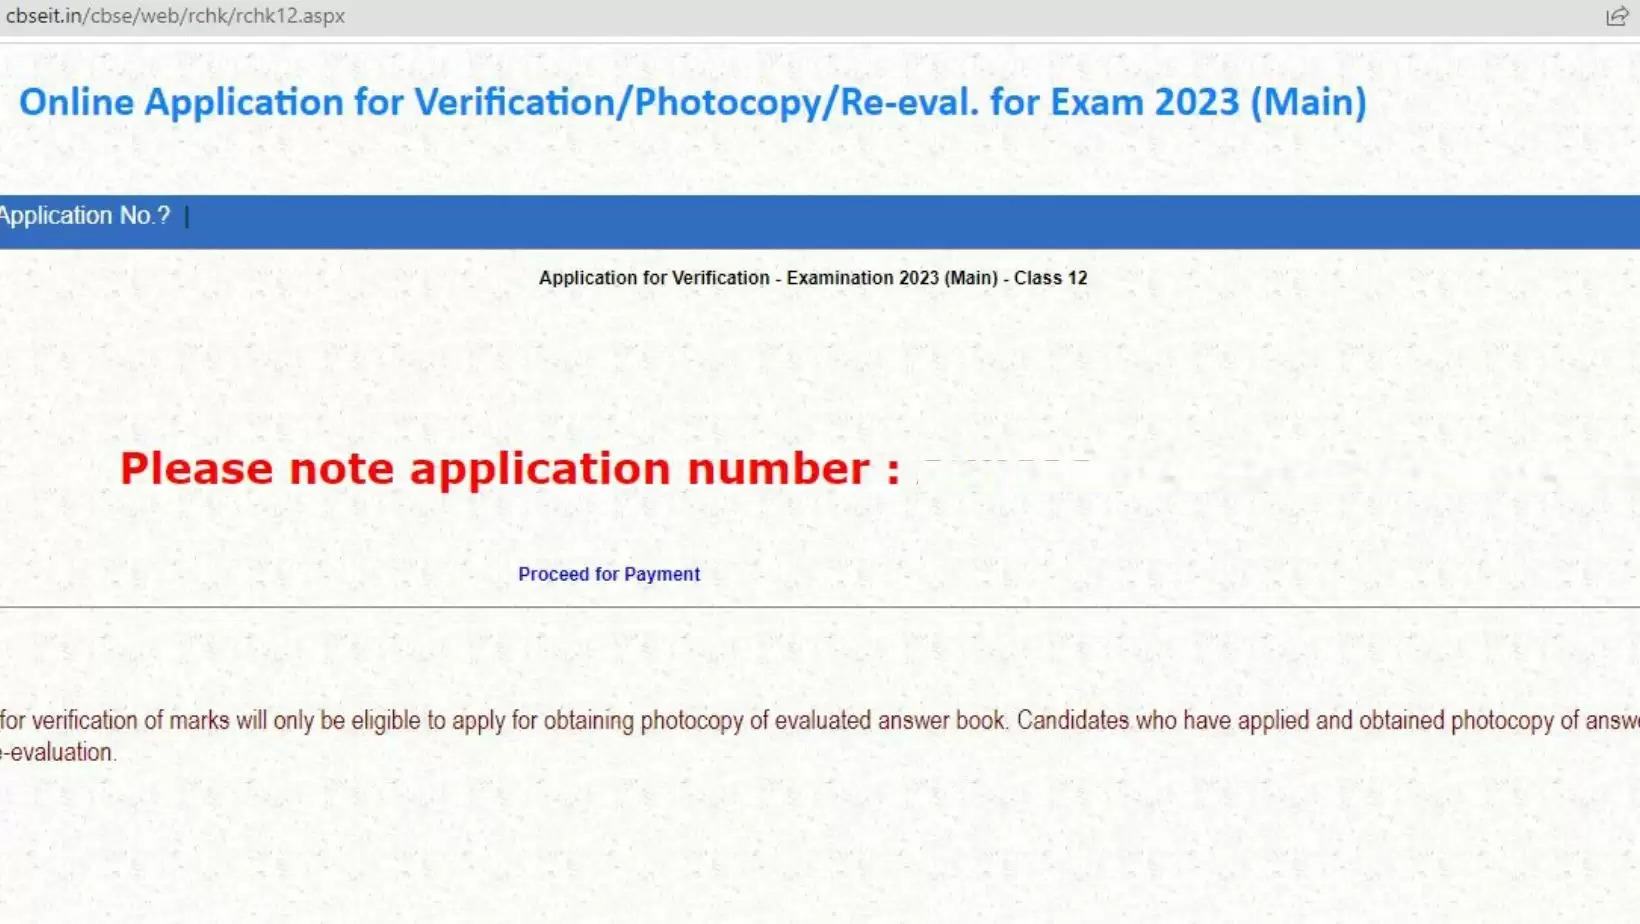 How to Apply for Re-evaluation of Marks, CBSE Board Examination Revaluation of Marks Class 10 Class 12, Has the CBSE started re-evaluation of Marks